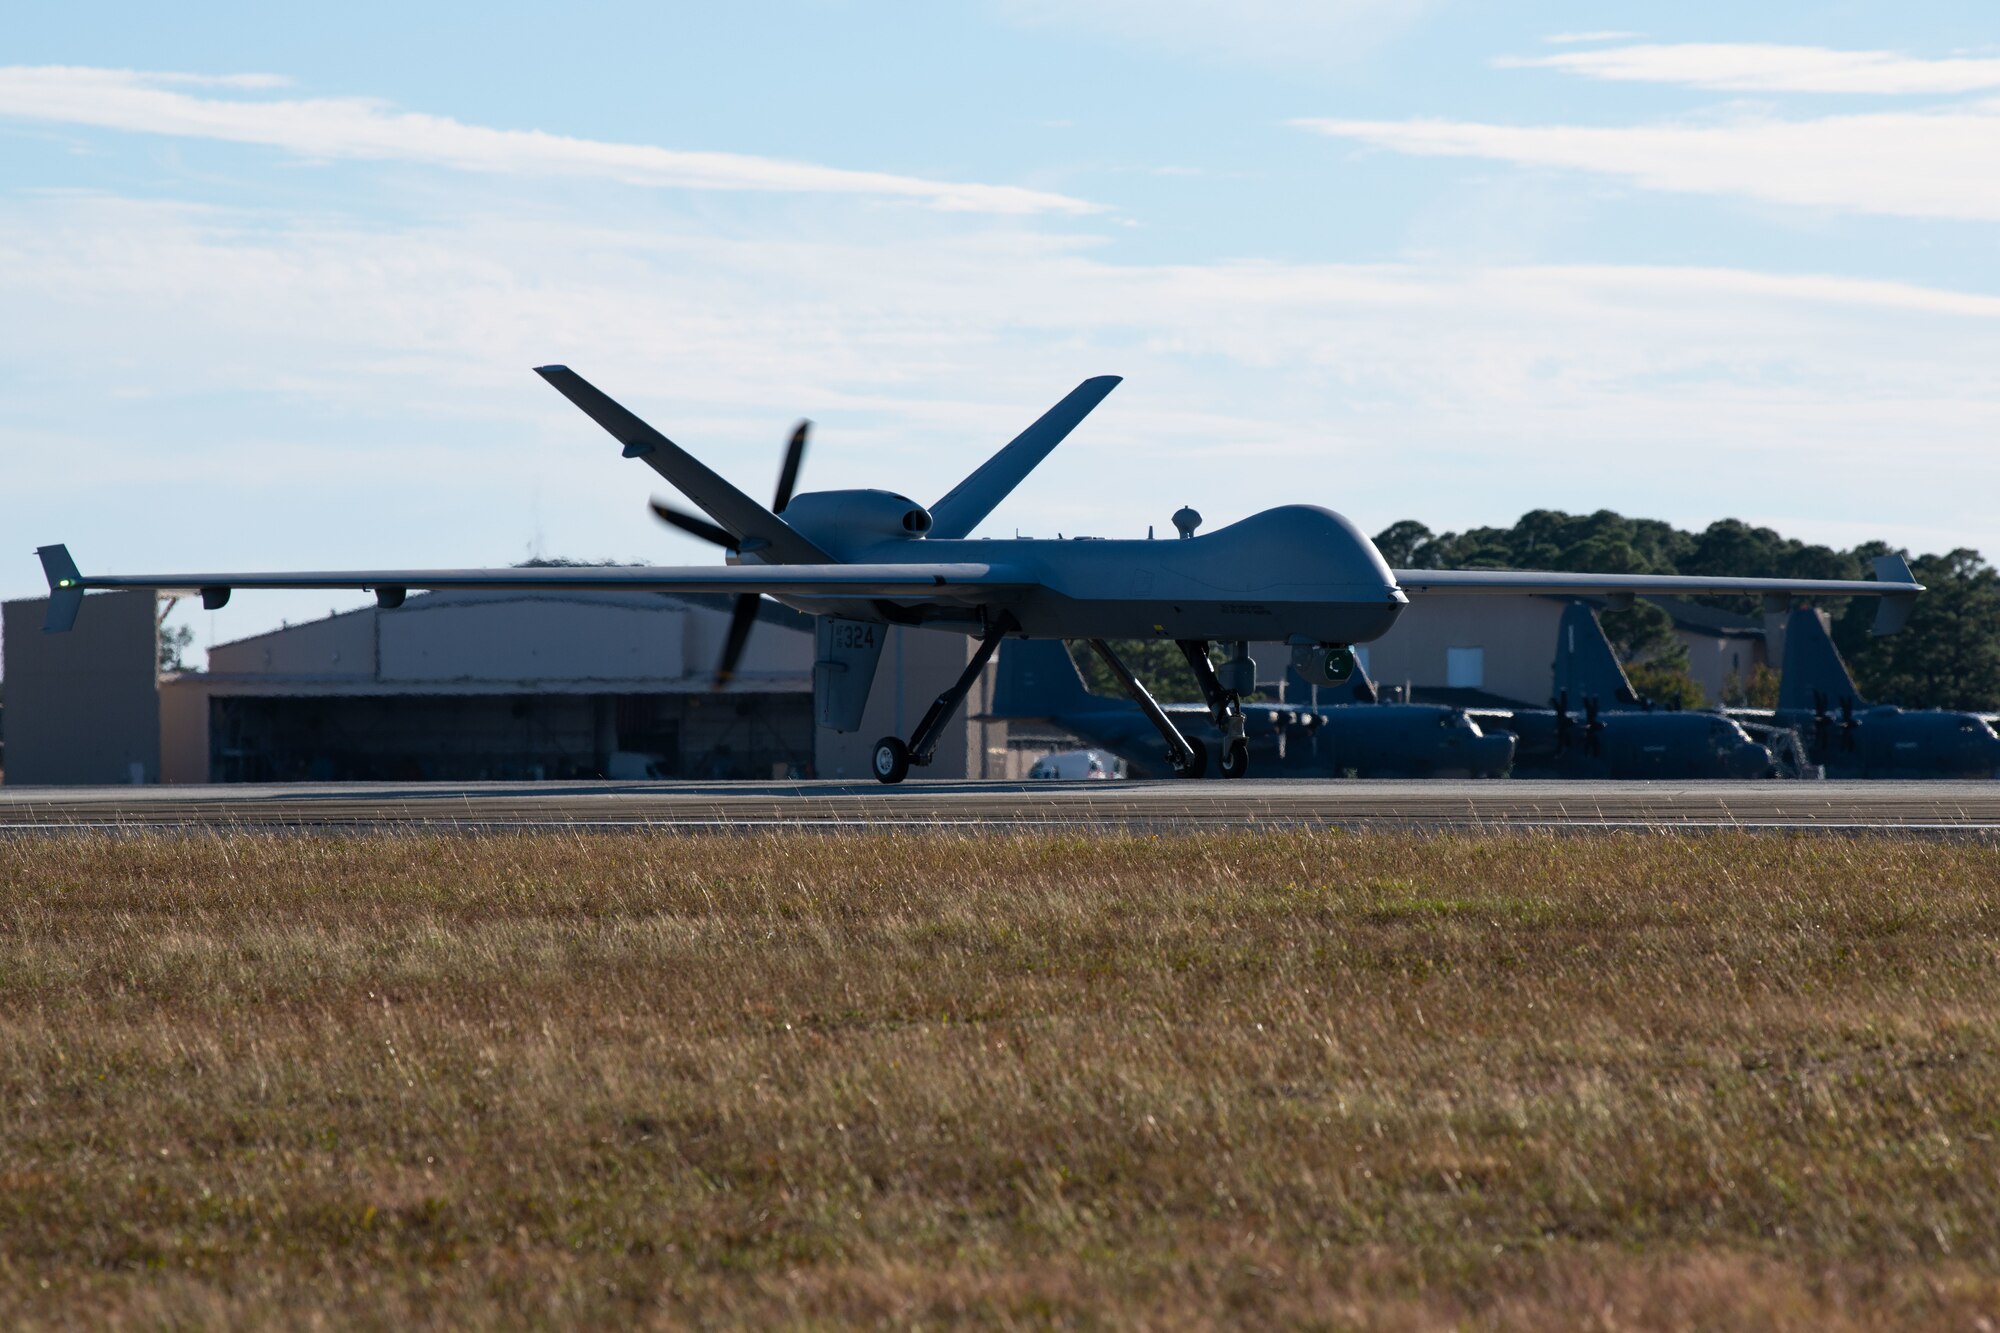 The Reaper, assigned to the 27th Special Operations Group, traveled from Cannon Air Force Base, New Mexico to Austere Field #6, Florida, before arriving at Hurlburt Field.